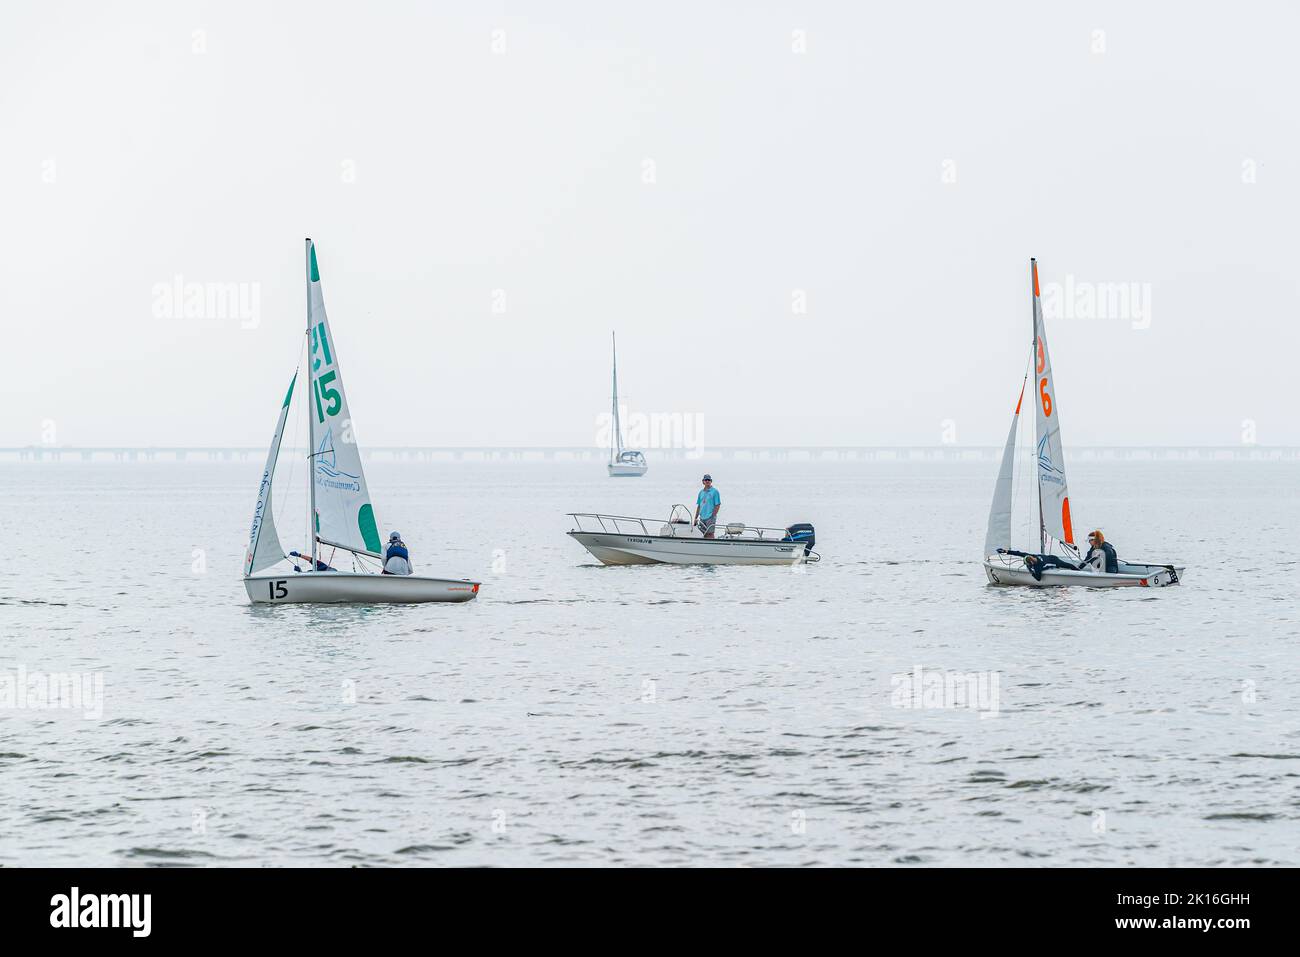 NEW ORLEANS, LA, USA - FEBRUARY 16, 2019: Small sailboat regatta on Lake Pontchartrain with two competitive boats, a monitor and fog in the background Stock Photo